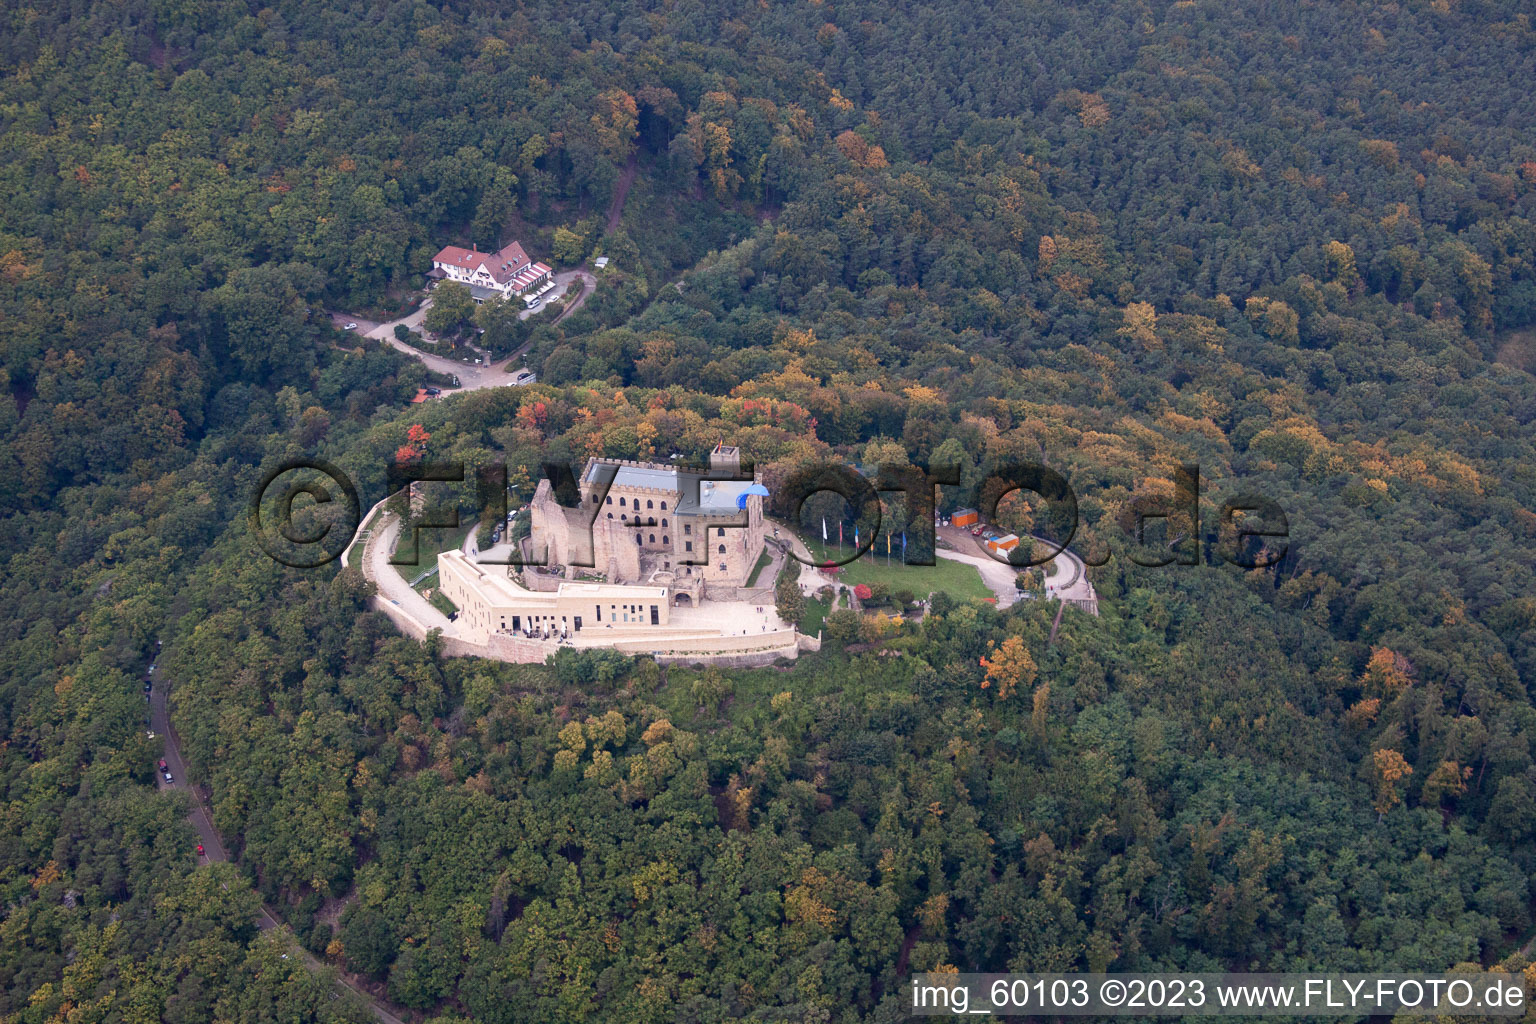 Drone recording of Hambach Castle in the district Diedesfeld in Neustadt an der Weinstraße in the state Rhineland-Palatinate, Germany